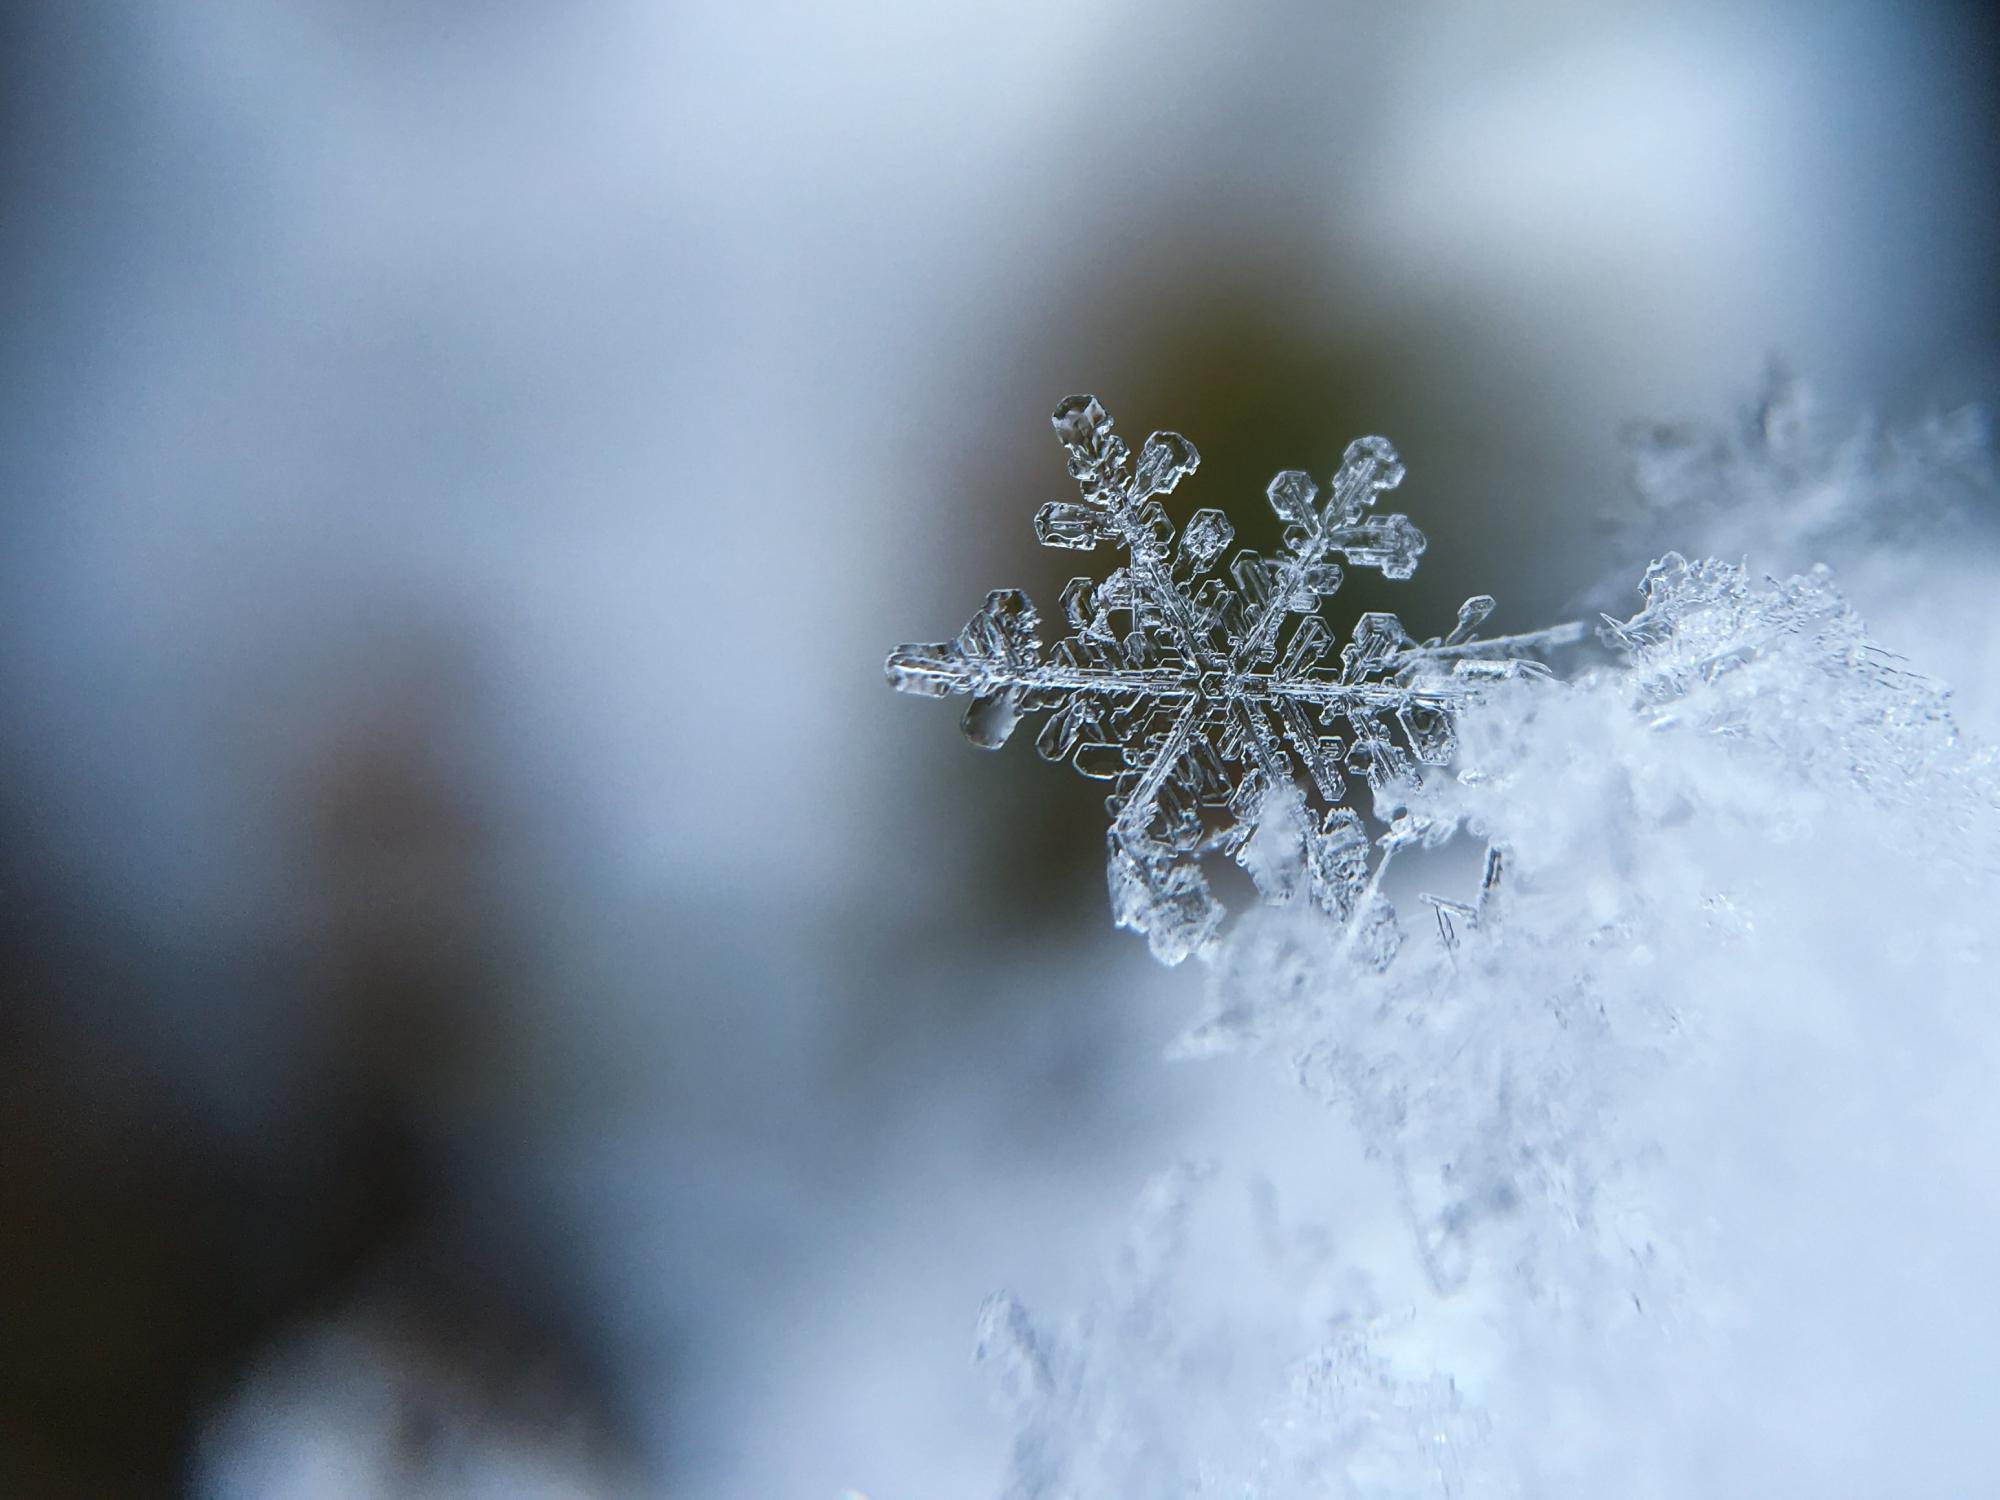 Extreme close up of snowflake